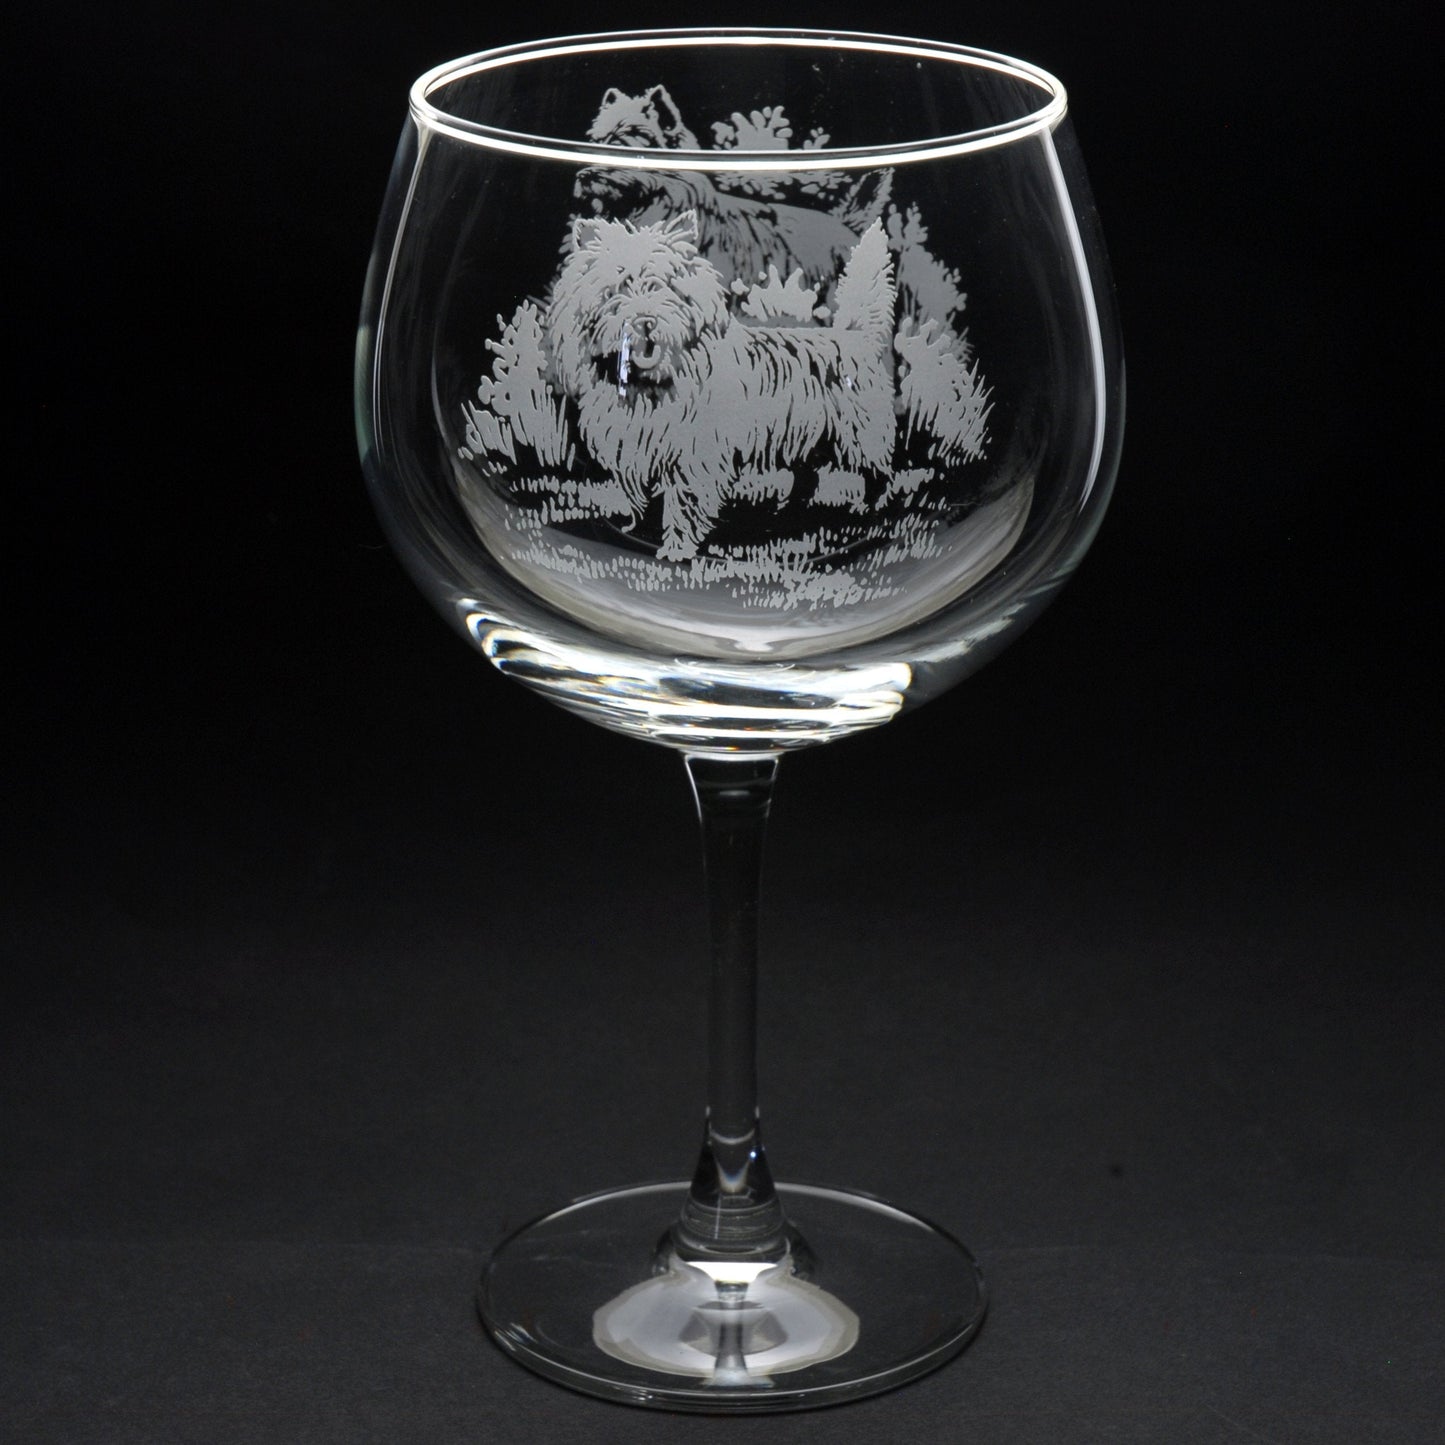 Cairn Terrier Dog Gin Cocktail Glass - Hand Etched/Engraved Gift